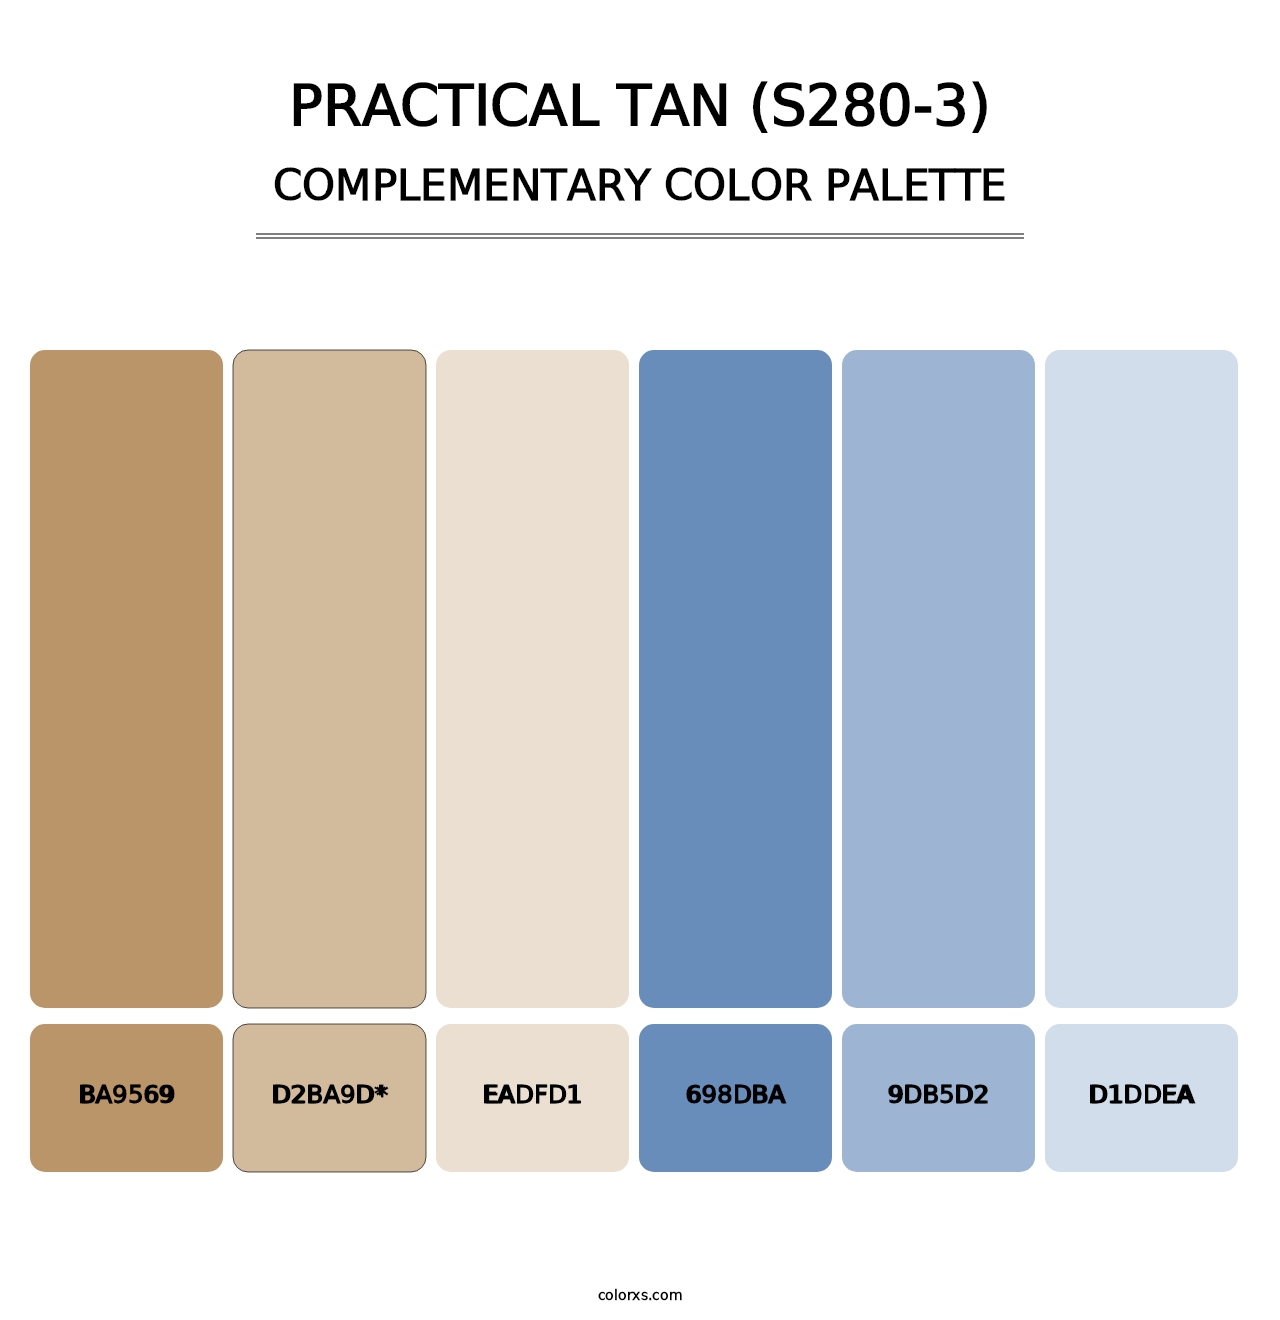 Practical Tan (S280-3) - Complementary Color Palette